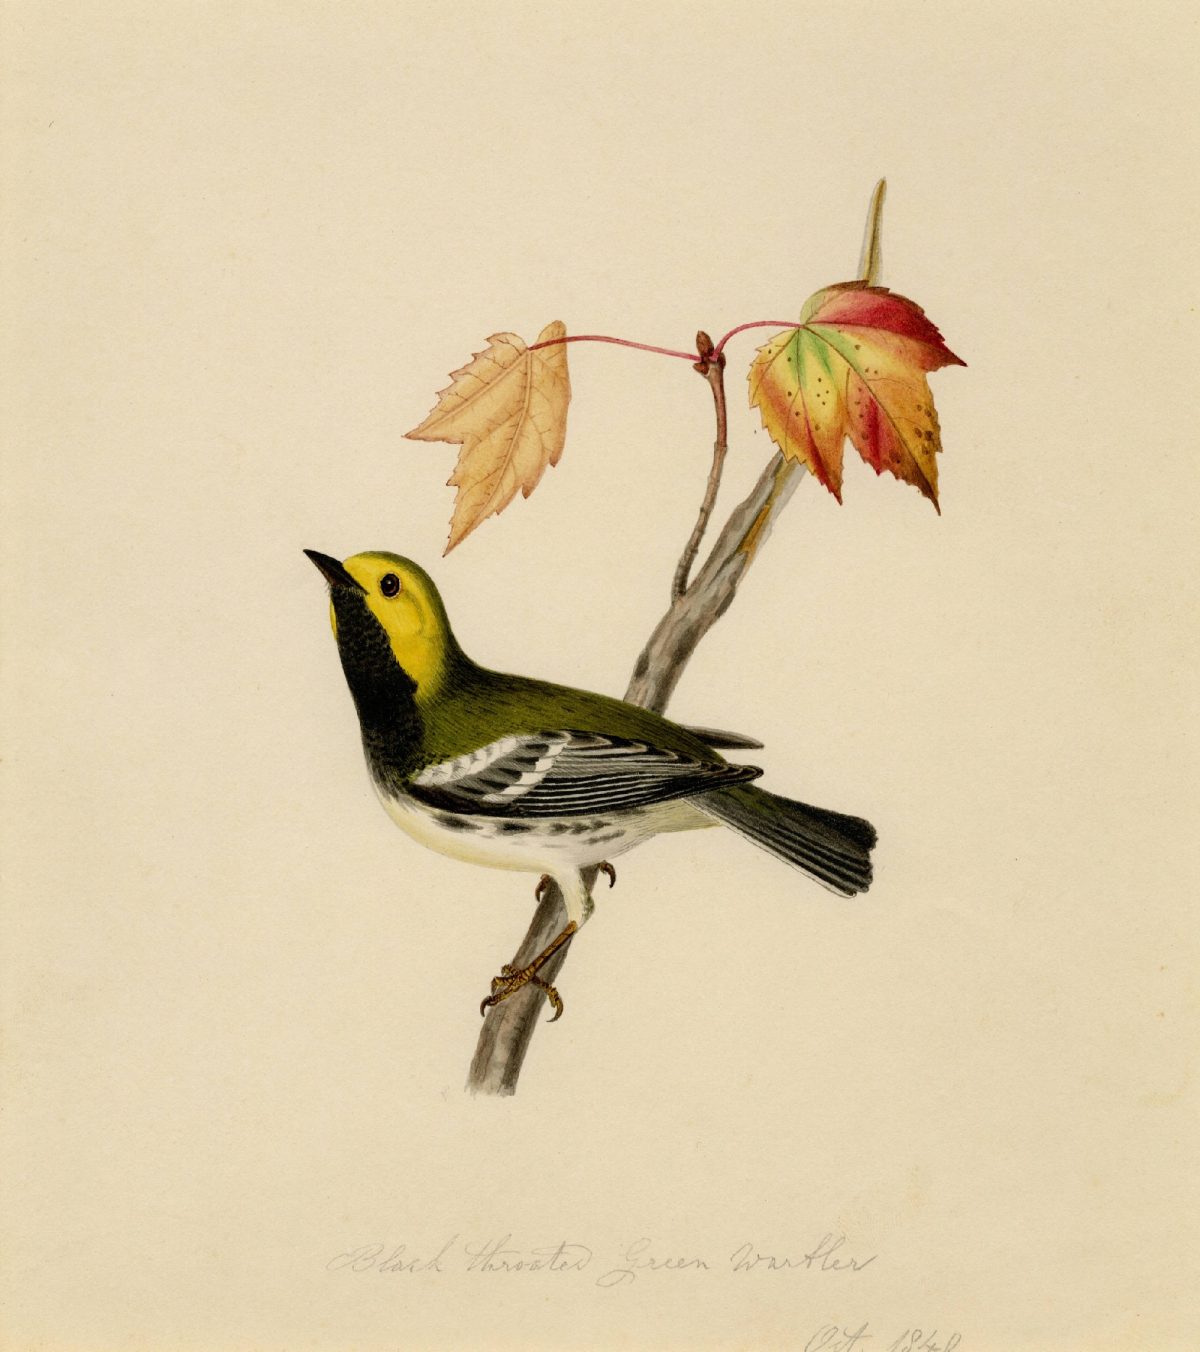 Black Throated Green Warbler"A single male bird is depicted on a branch of red maple with seeds" 